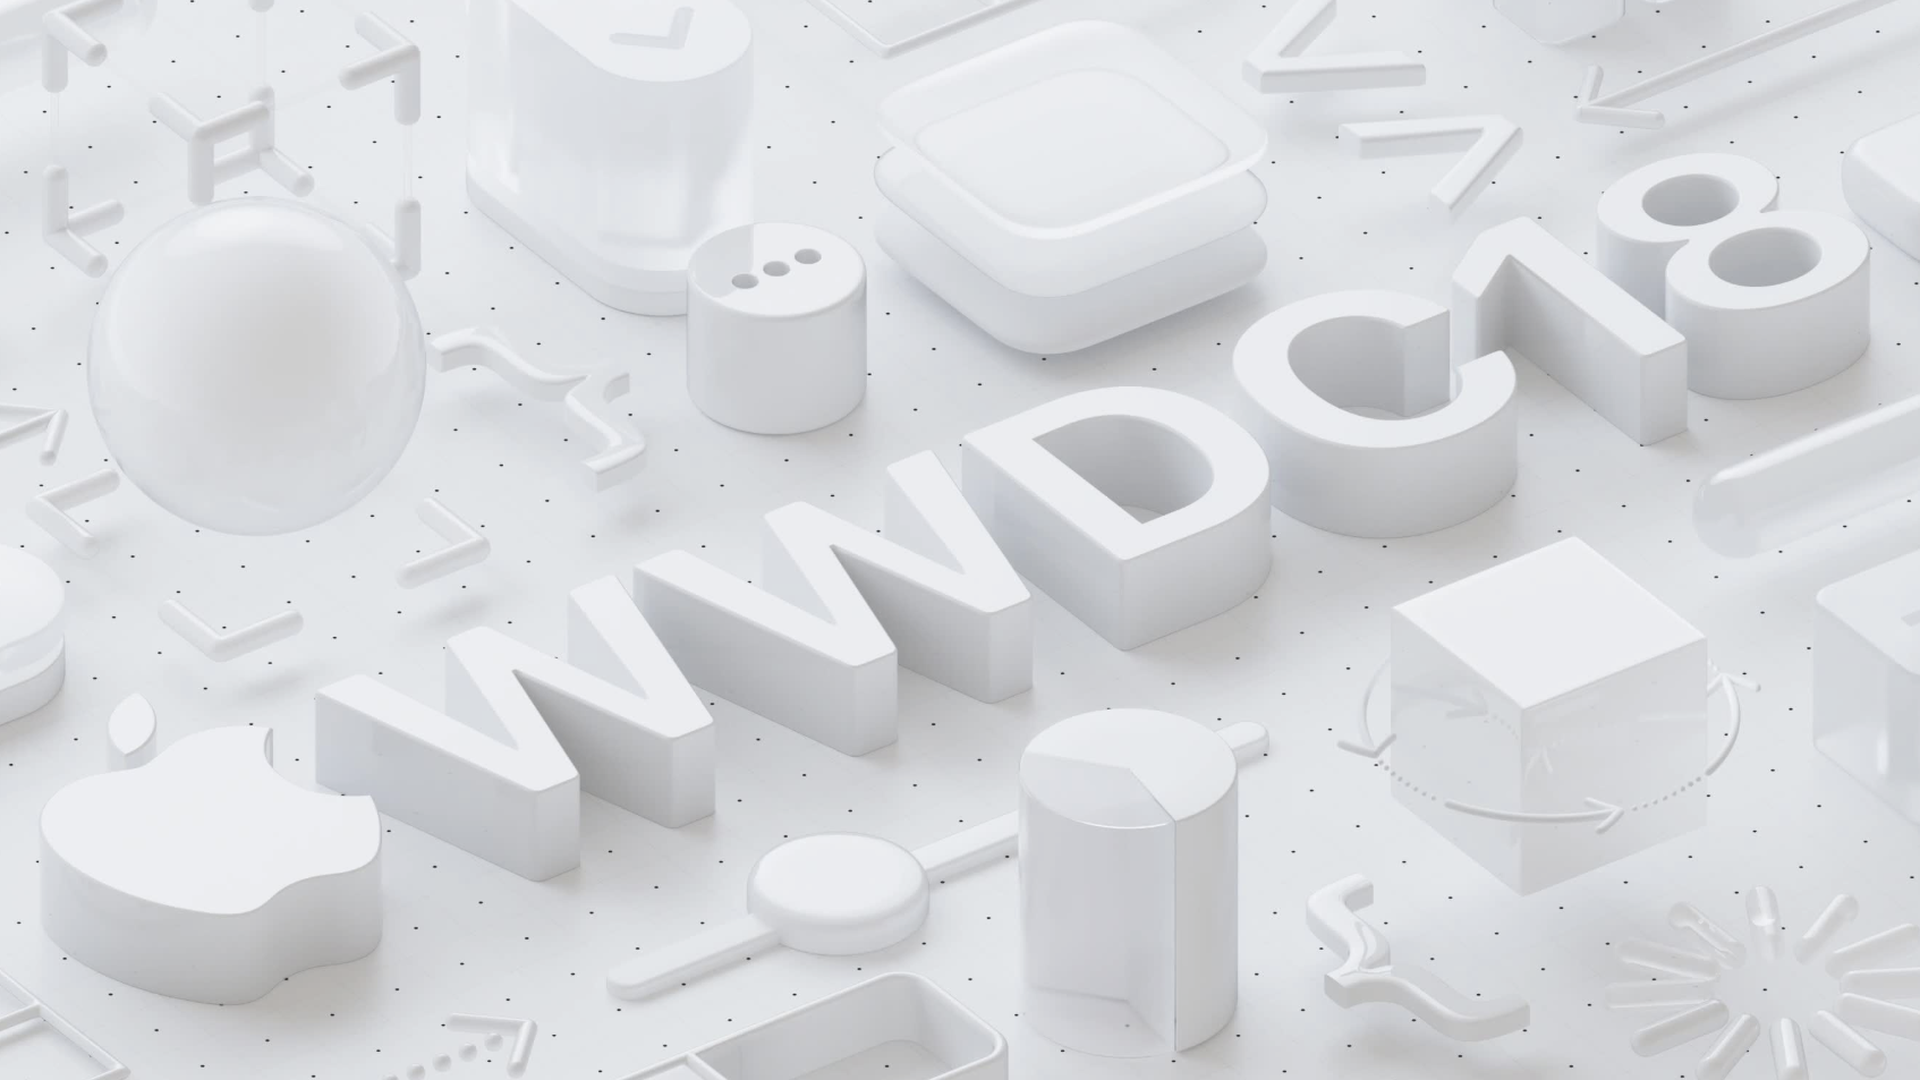 WWDC symbols from a screenshot from Apple's website